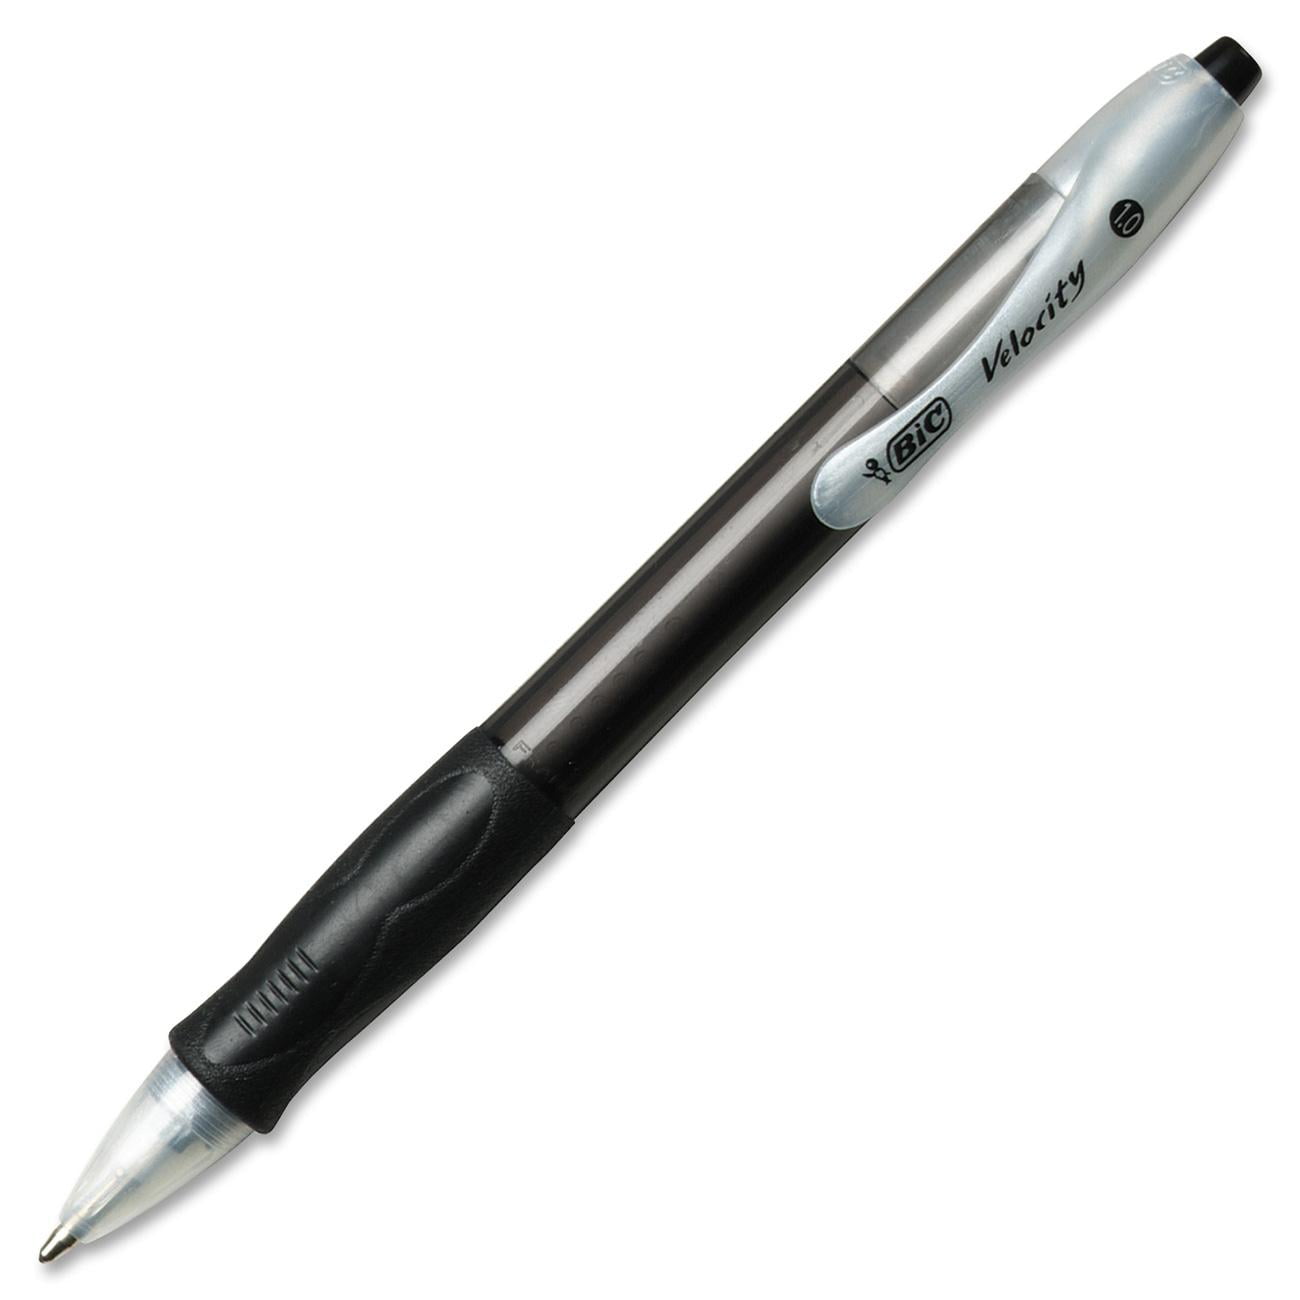 Black/Blue/Red Ink Free Shipping 1 Retractable Ballpoint Pen/Pencil BIC® 3